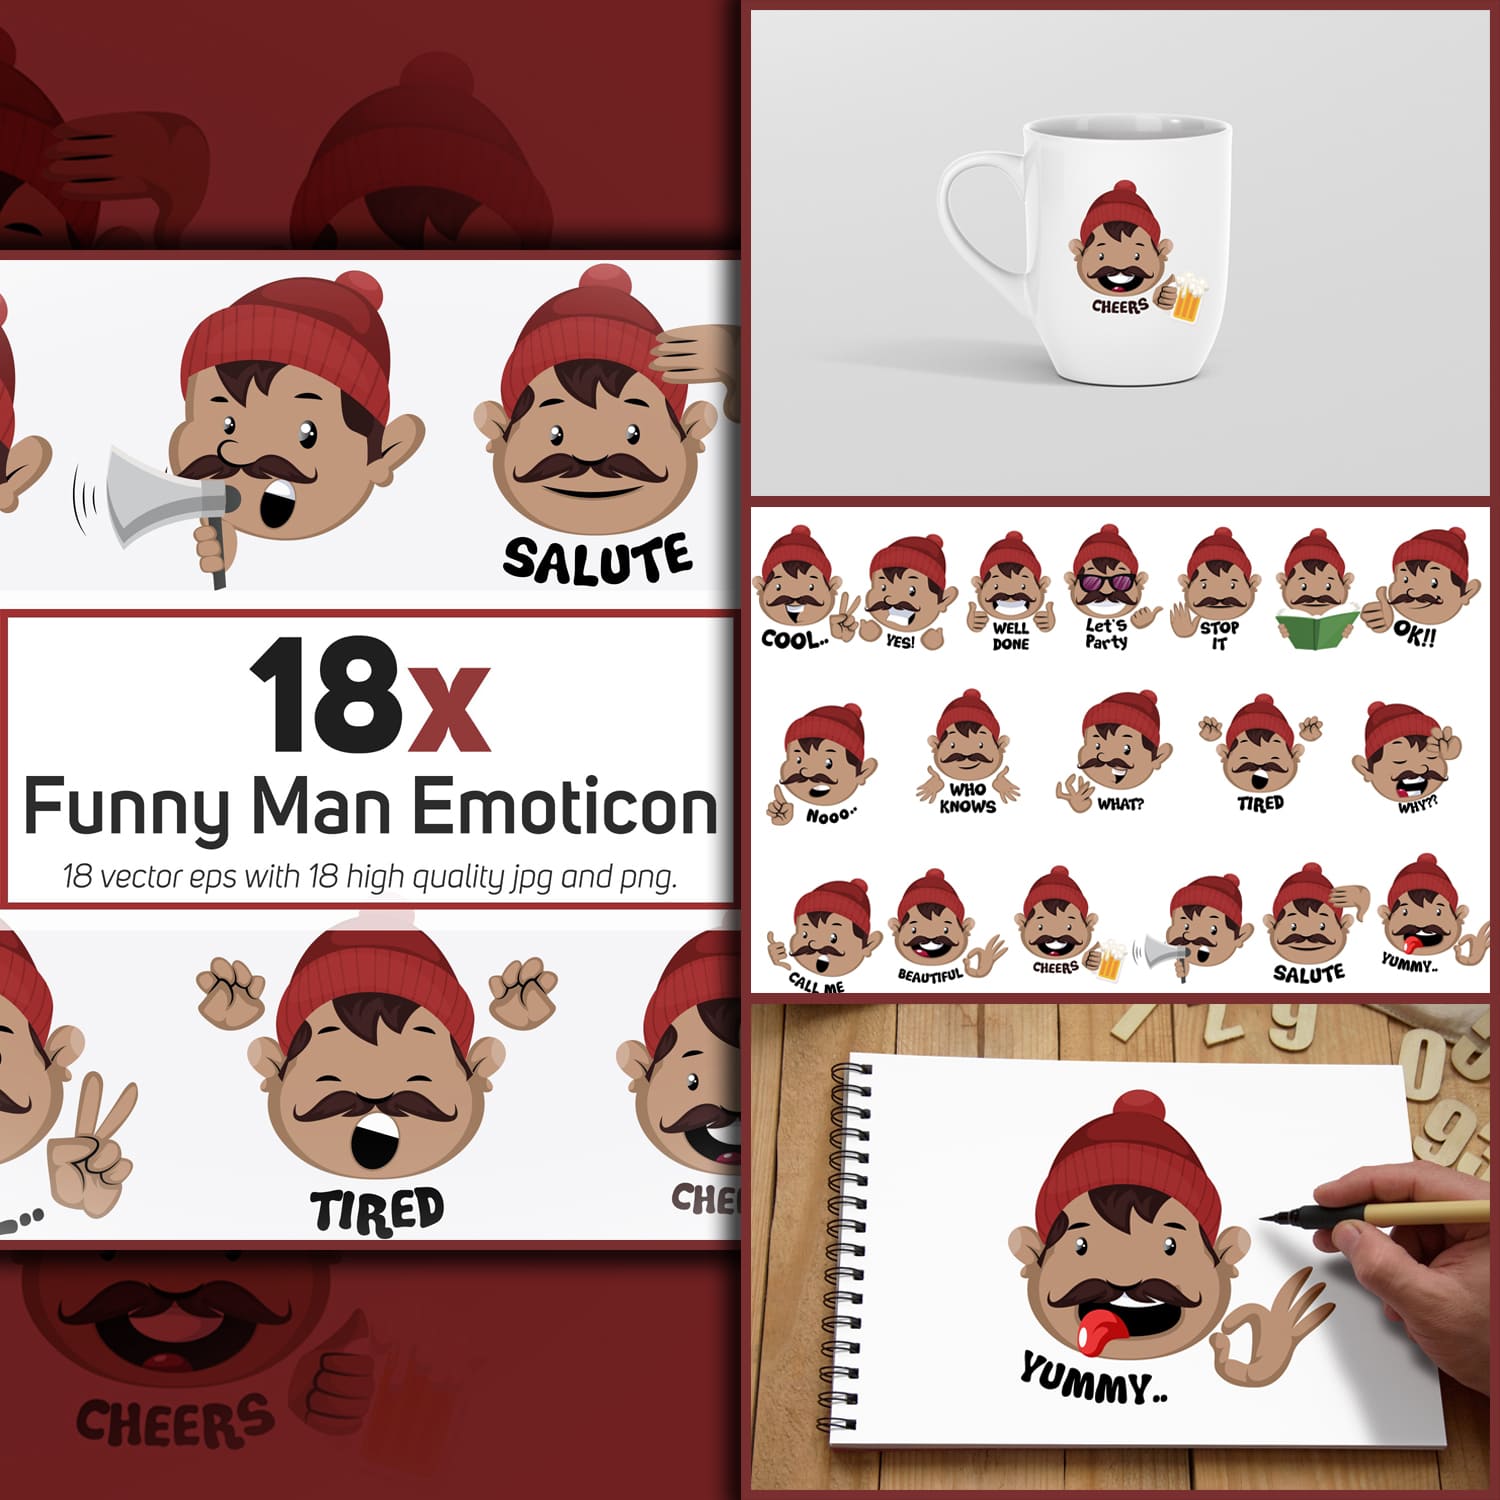 Preview funny man emoticon or stickers character colle.